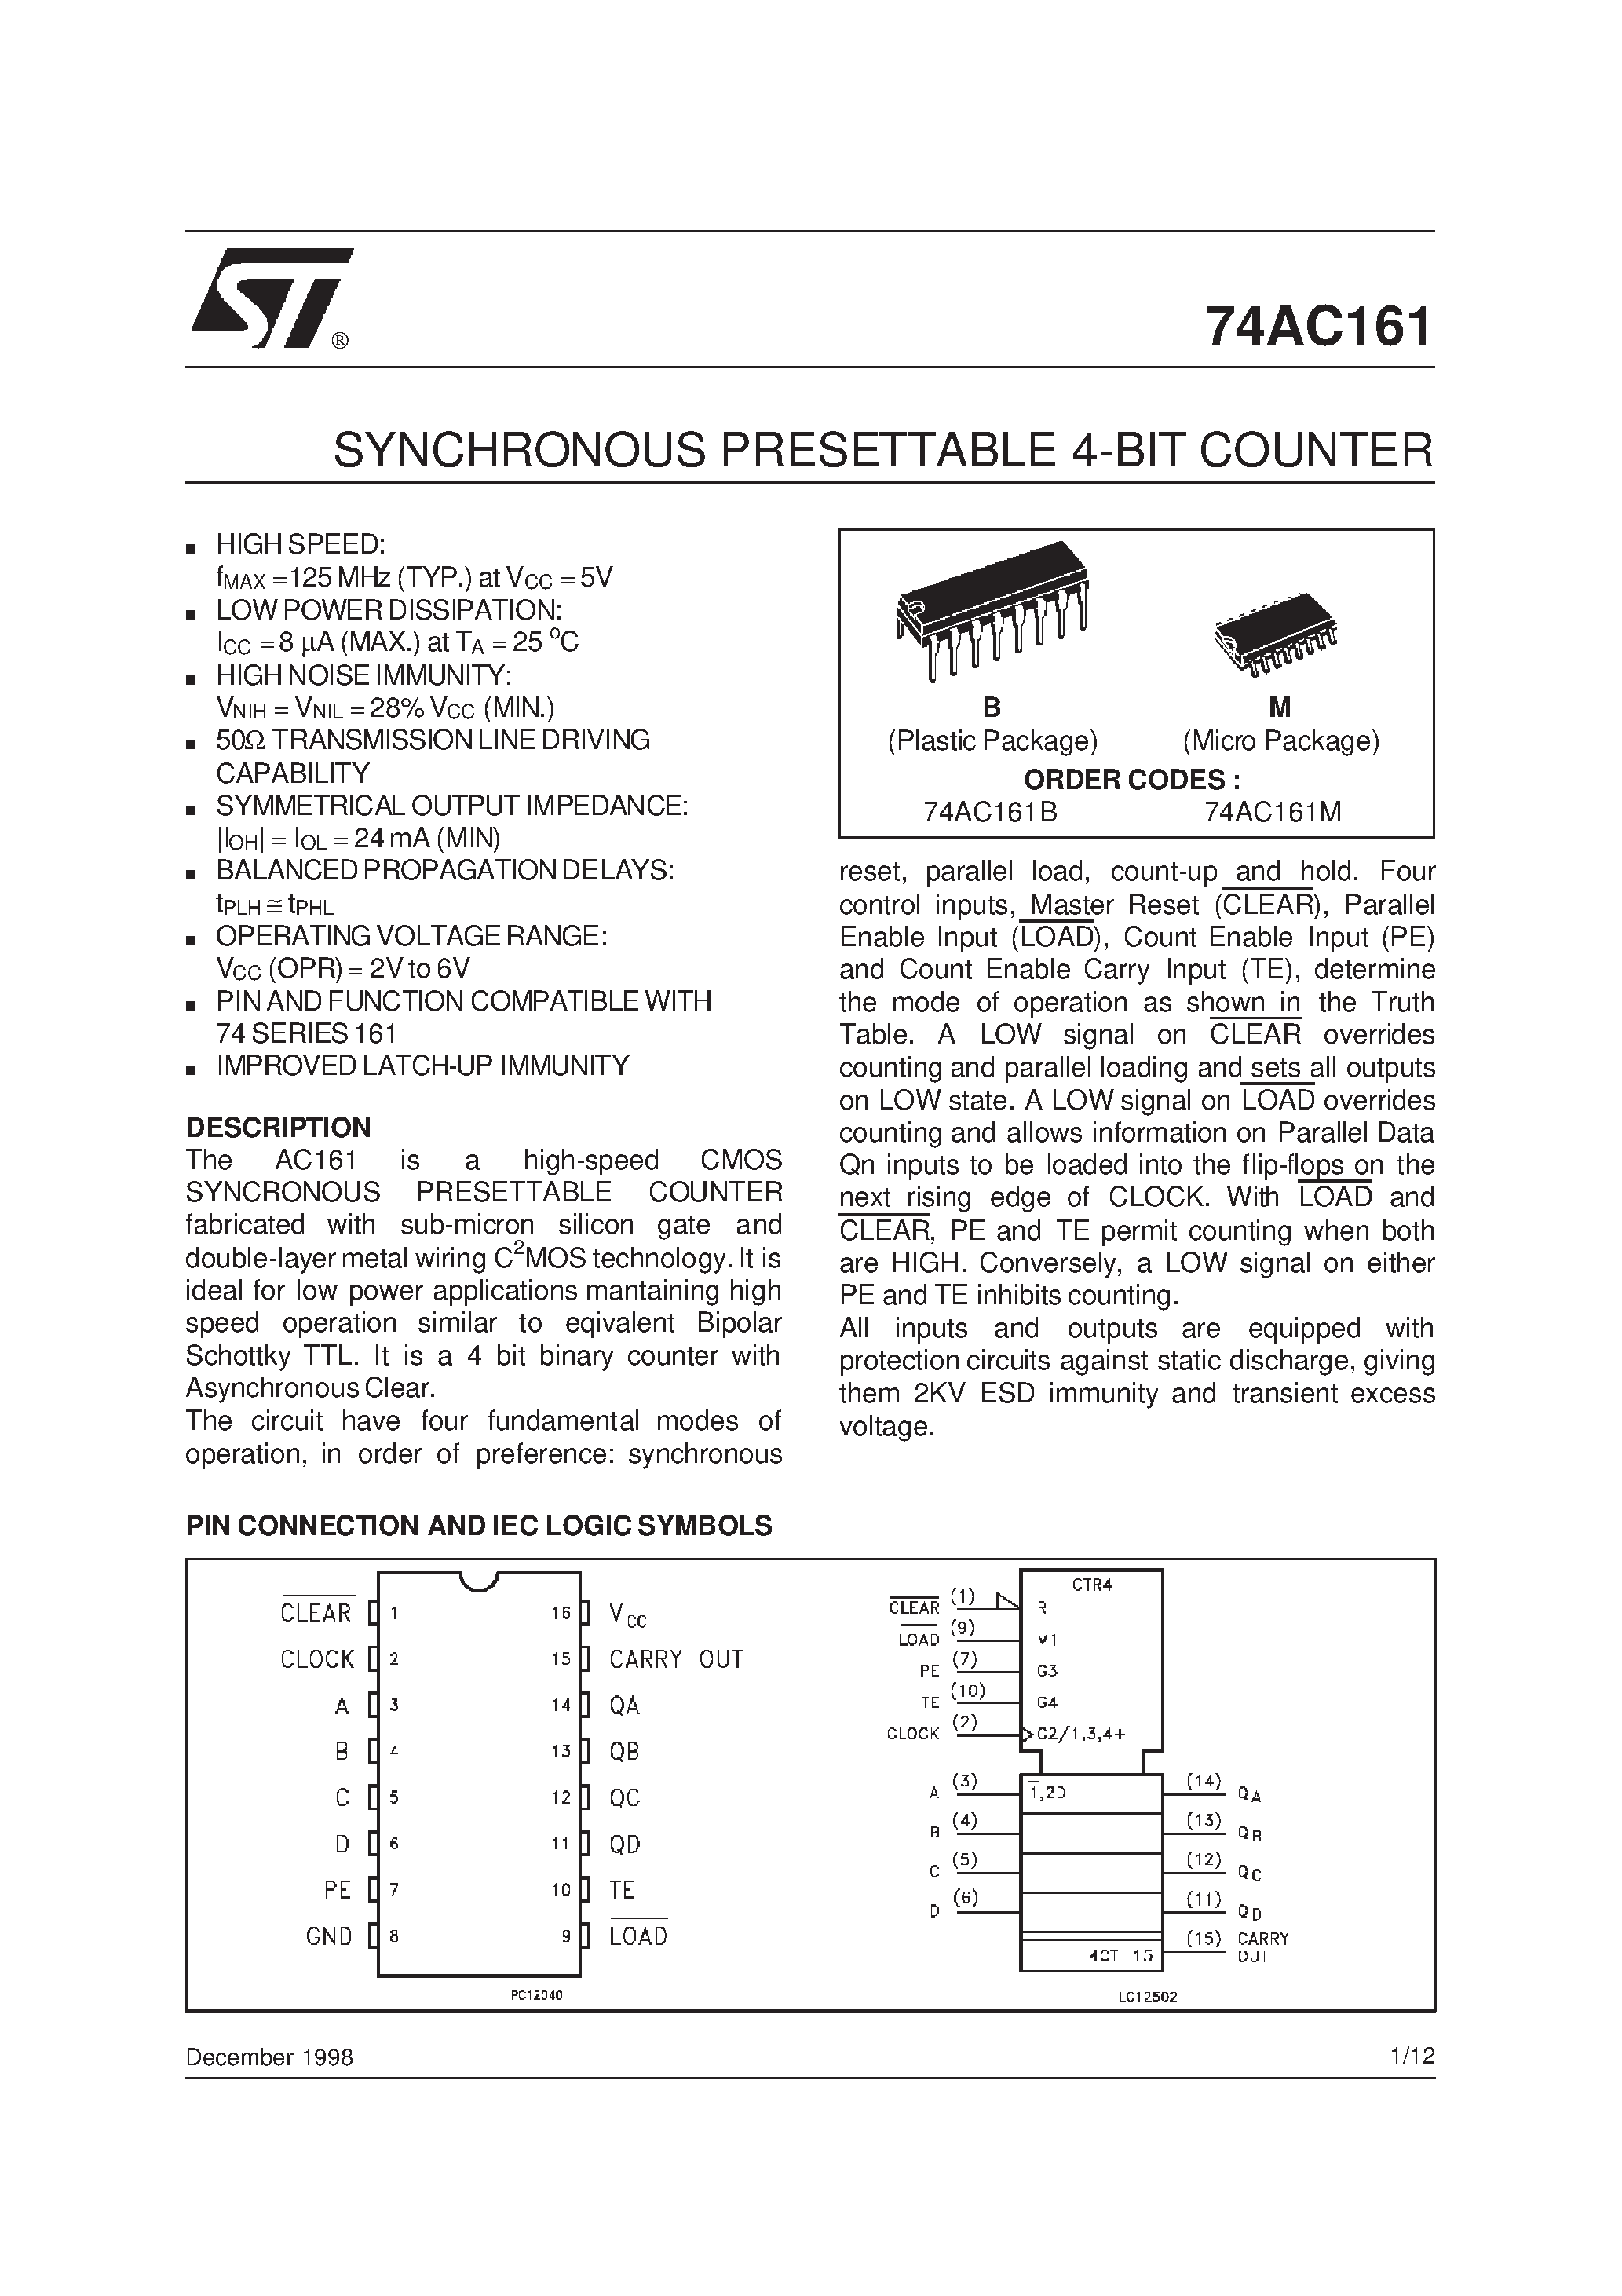 Datasheet 74AC161MTC - Synchronous Presettable Binary Counter page 1